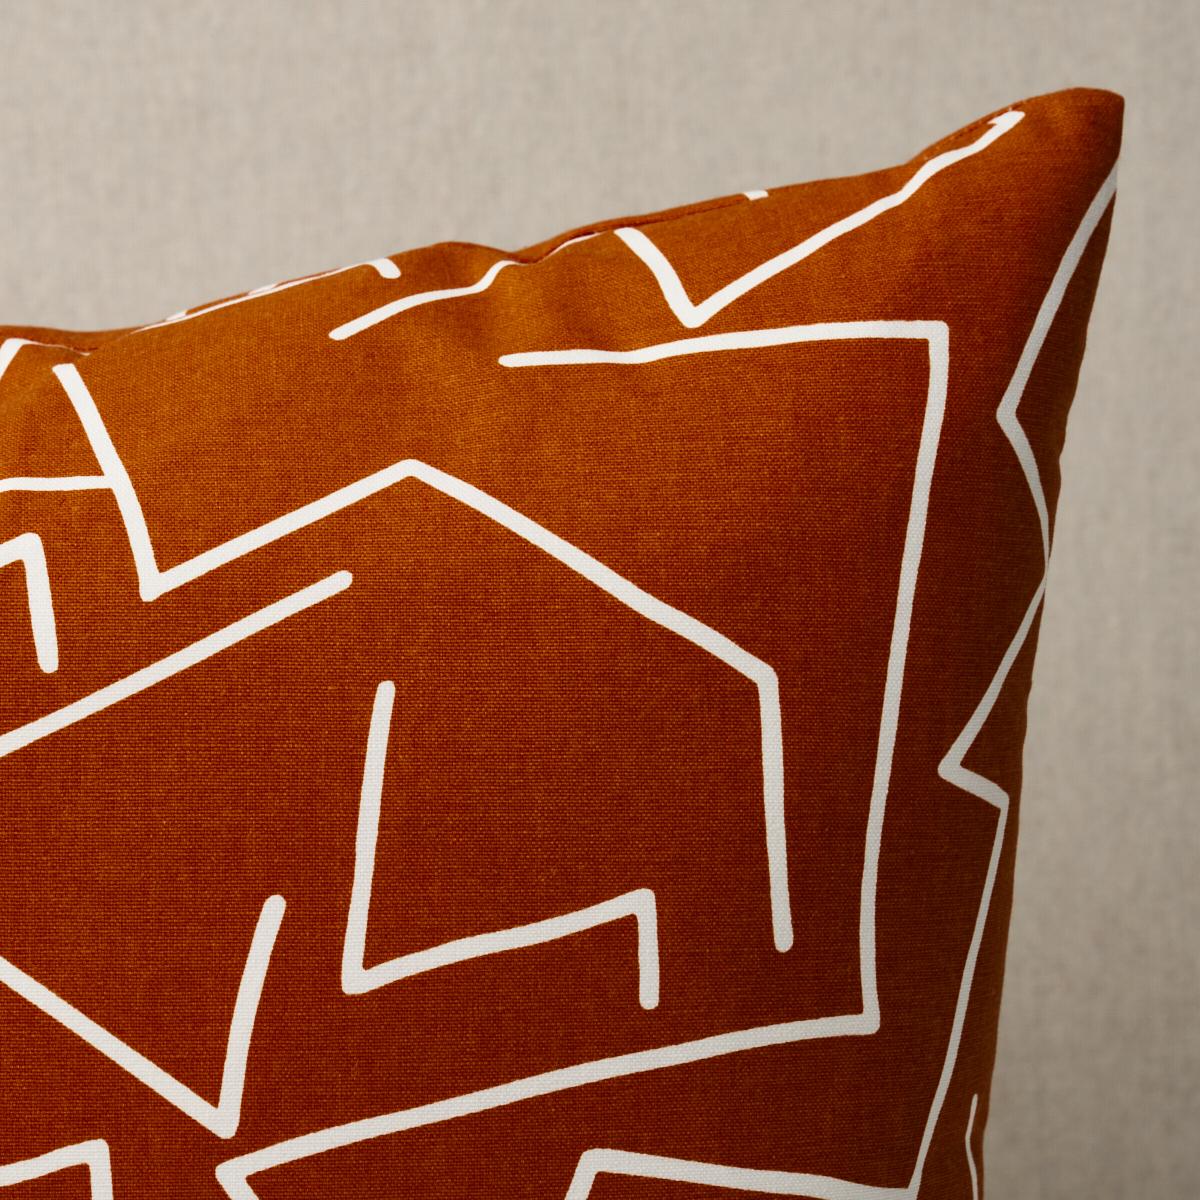 This pillow features Tangent Print by Hadiya Williams for Schumacher with a knife edge finish. Based on an original ink-and-pencil drawing, Hadiya Williams’ Tangent in saffron reduces a familiar constellation map to a lively linear abstraction.